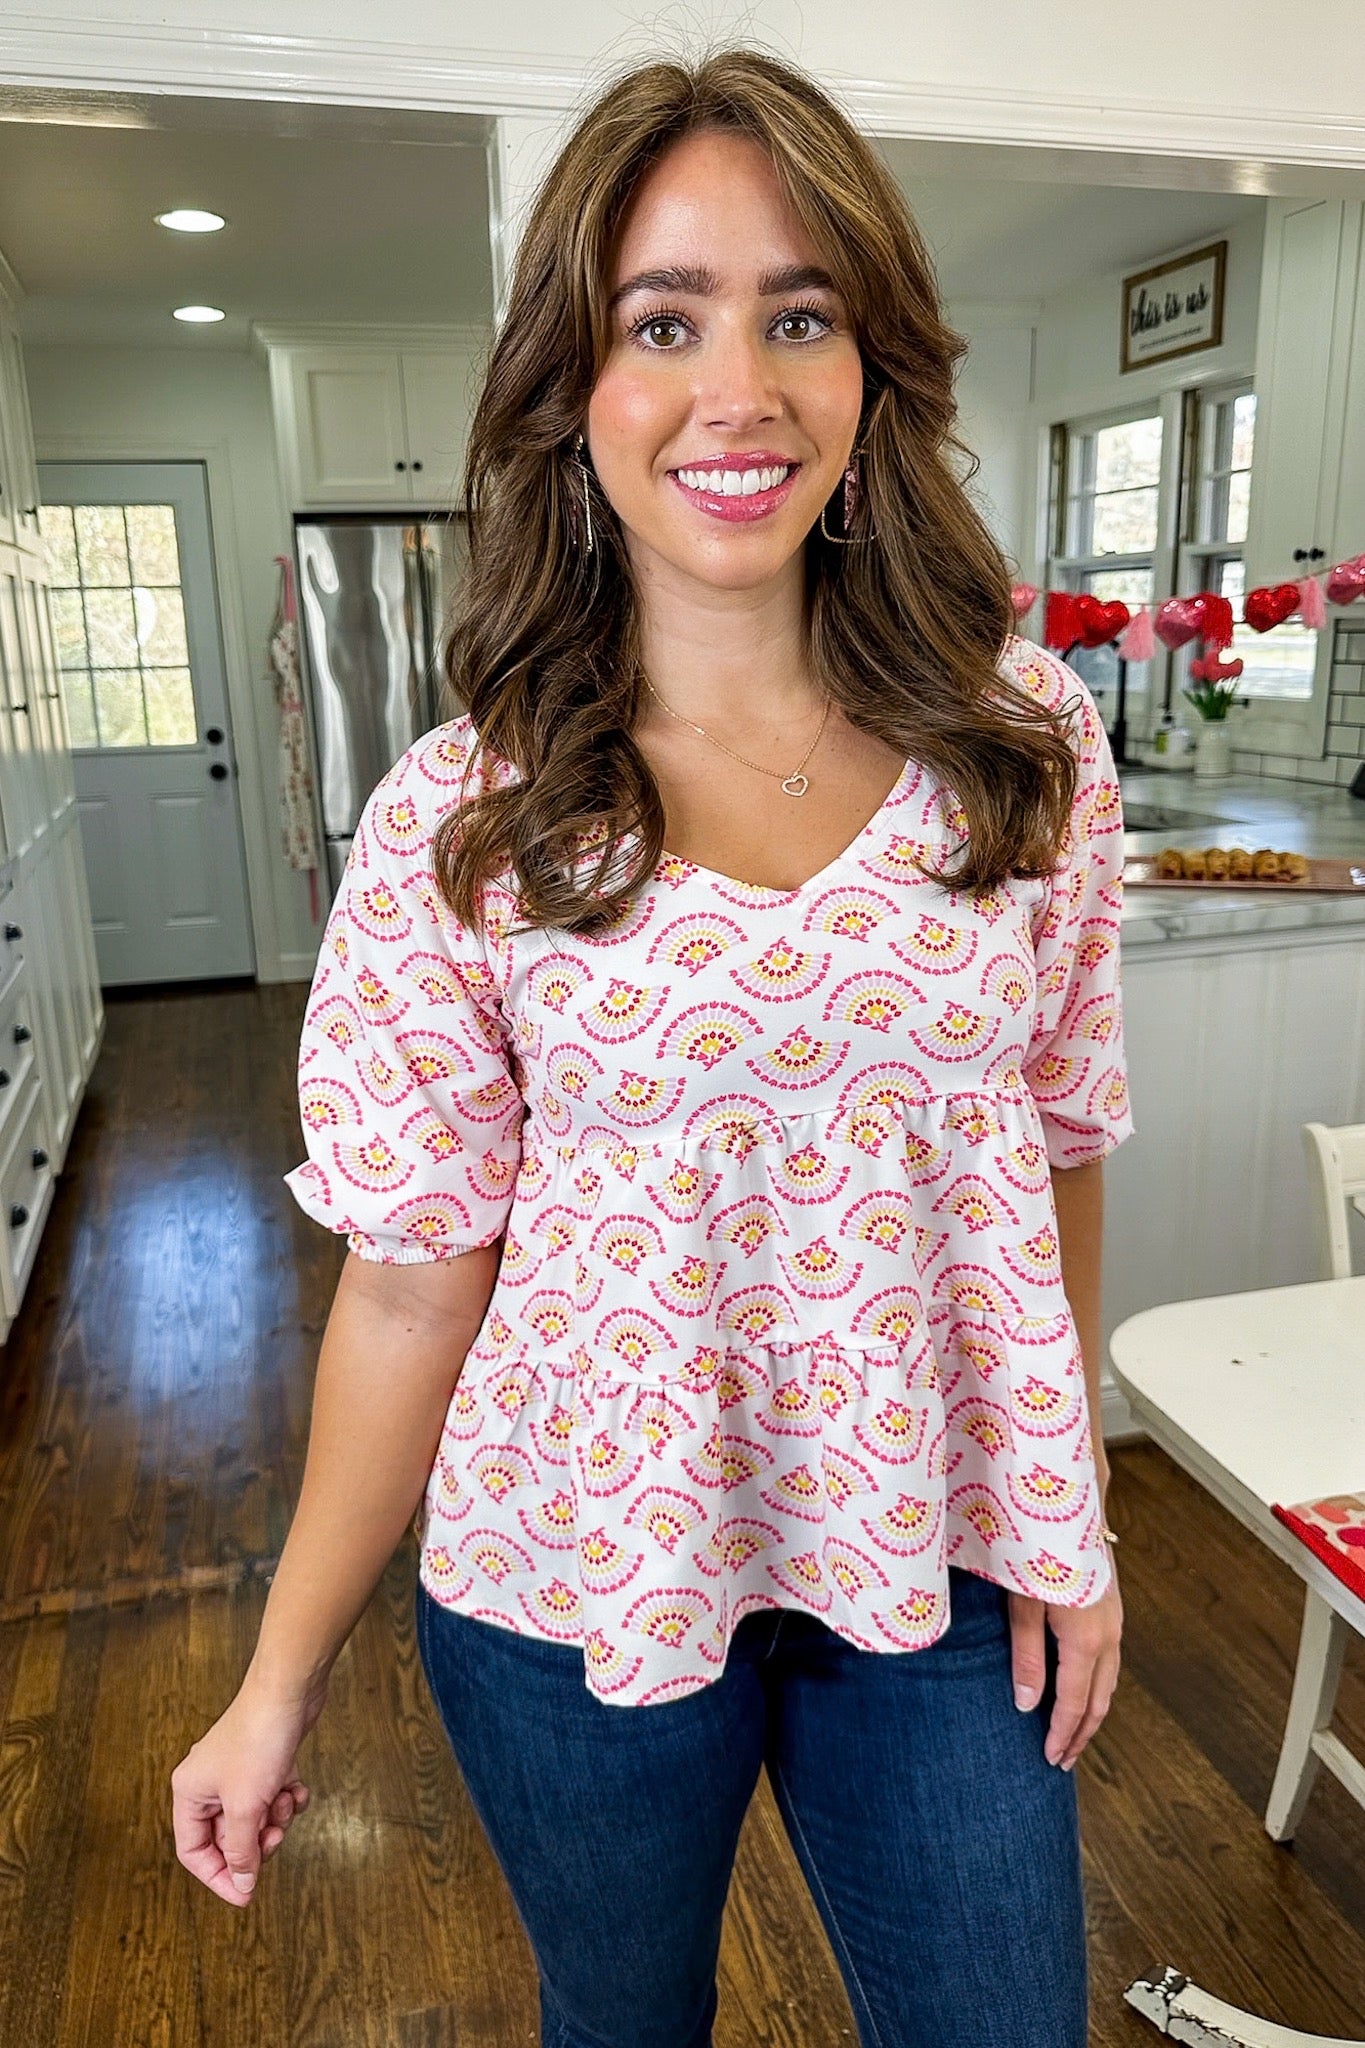 The Sophia Top in Pink Breezy Afternoon by Michelle McDowell